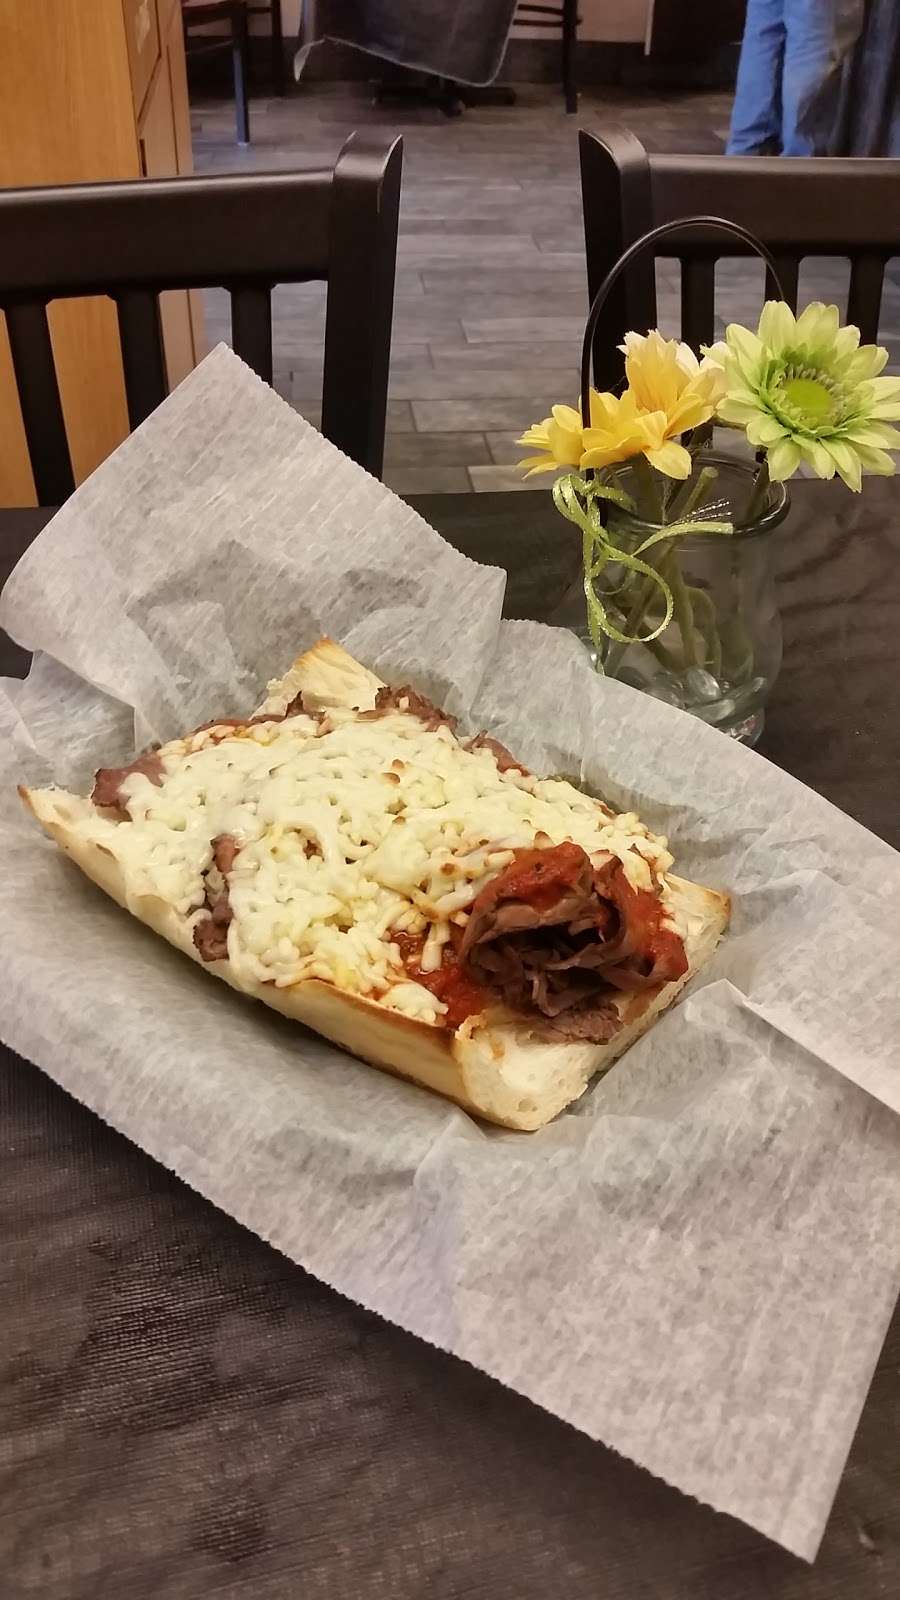 Palermos of 63rd Frankfort Pizza and Restaurant | 21014 South La Grange Road, Frankfort, IL 60423 | Phone: (815) 464-5300